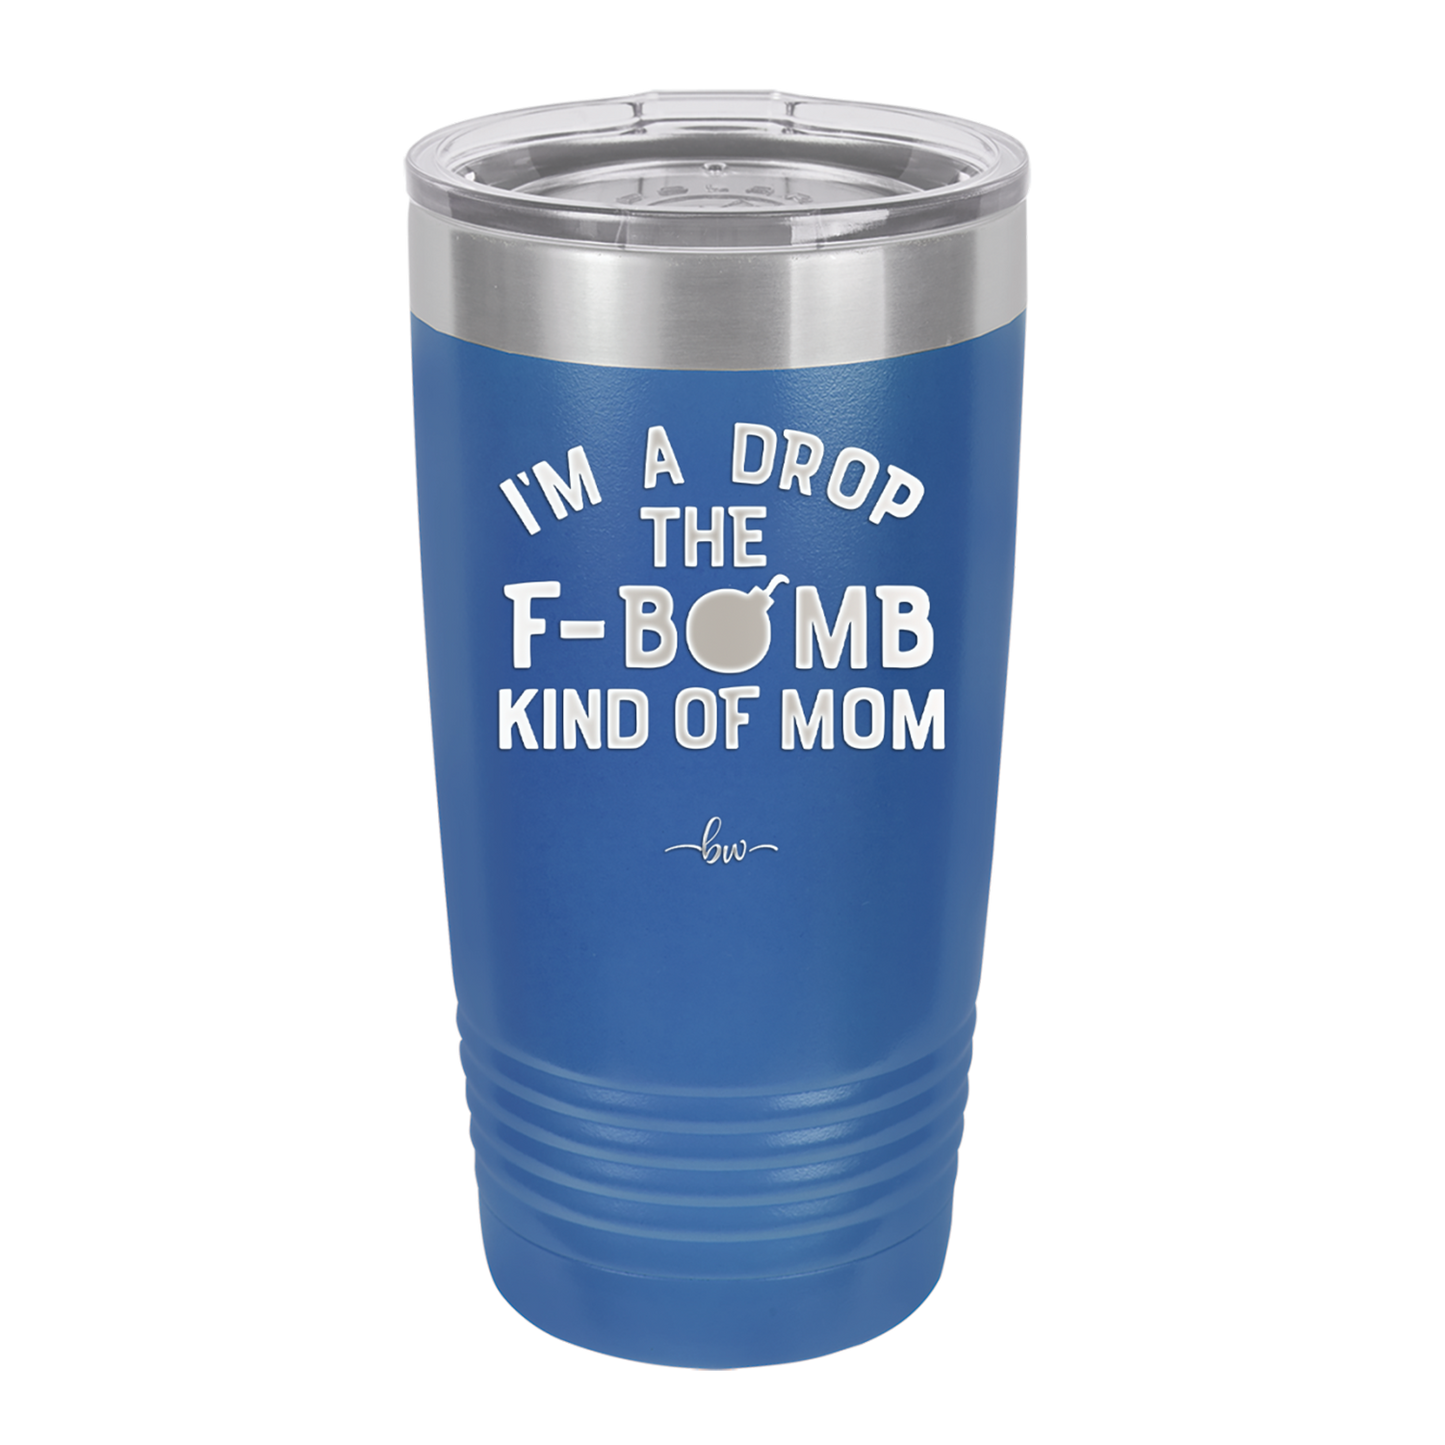 I'm a Drop the F-Bomb Kind of Mom - Laser Engraved Stainless Steel Drinkware - 1968 -